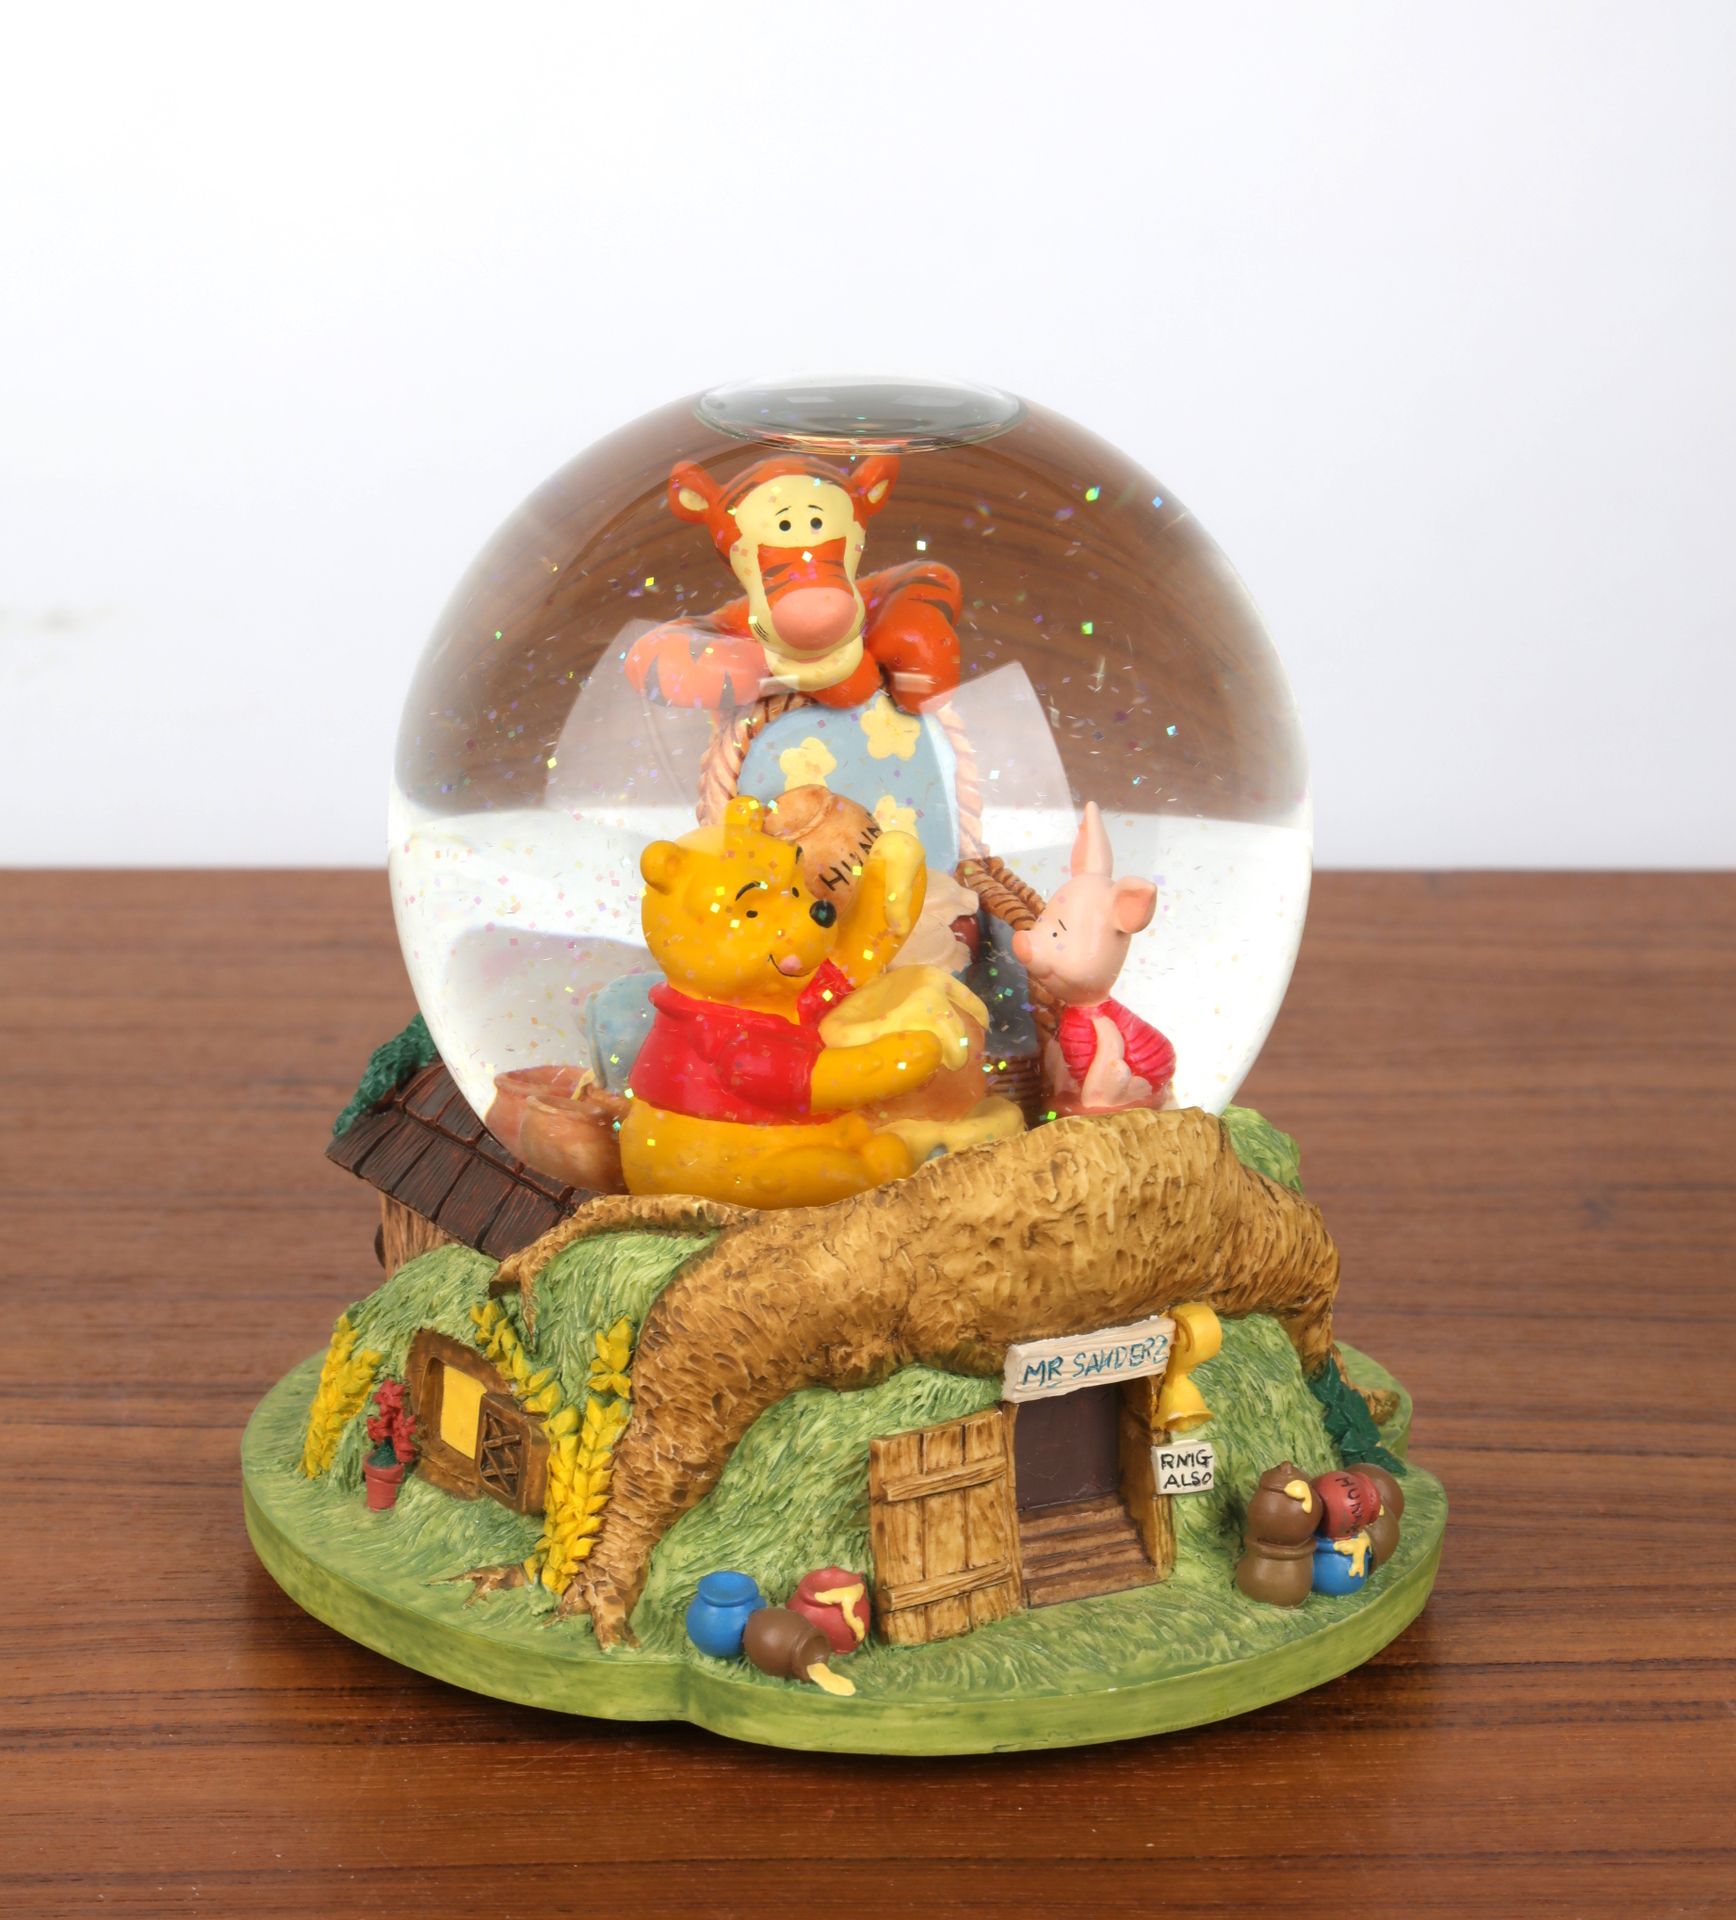 Null "Christmas ball", and music box with "Winnie the Pooh" decoration. 16x12cm.